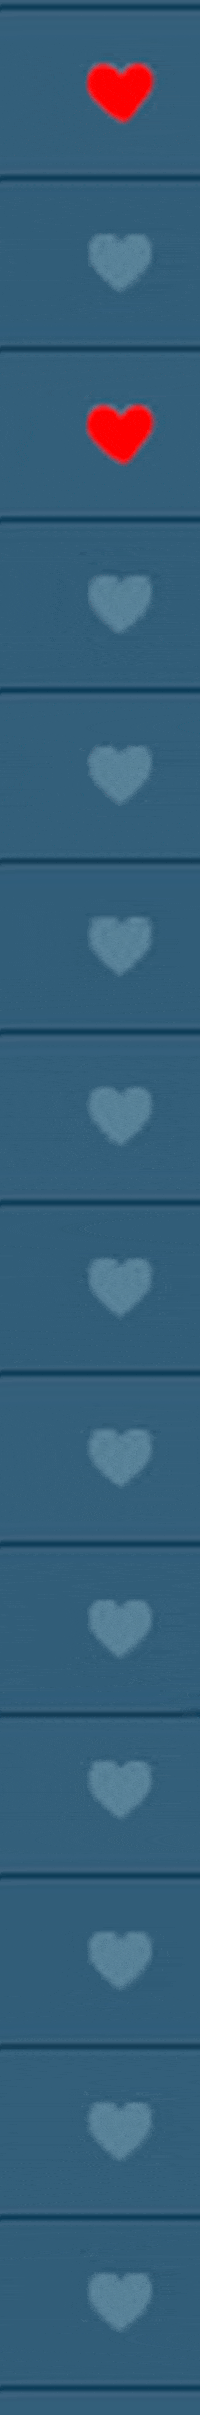 i love you too heart GIF by Miron